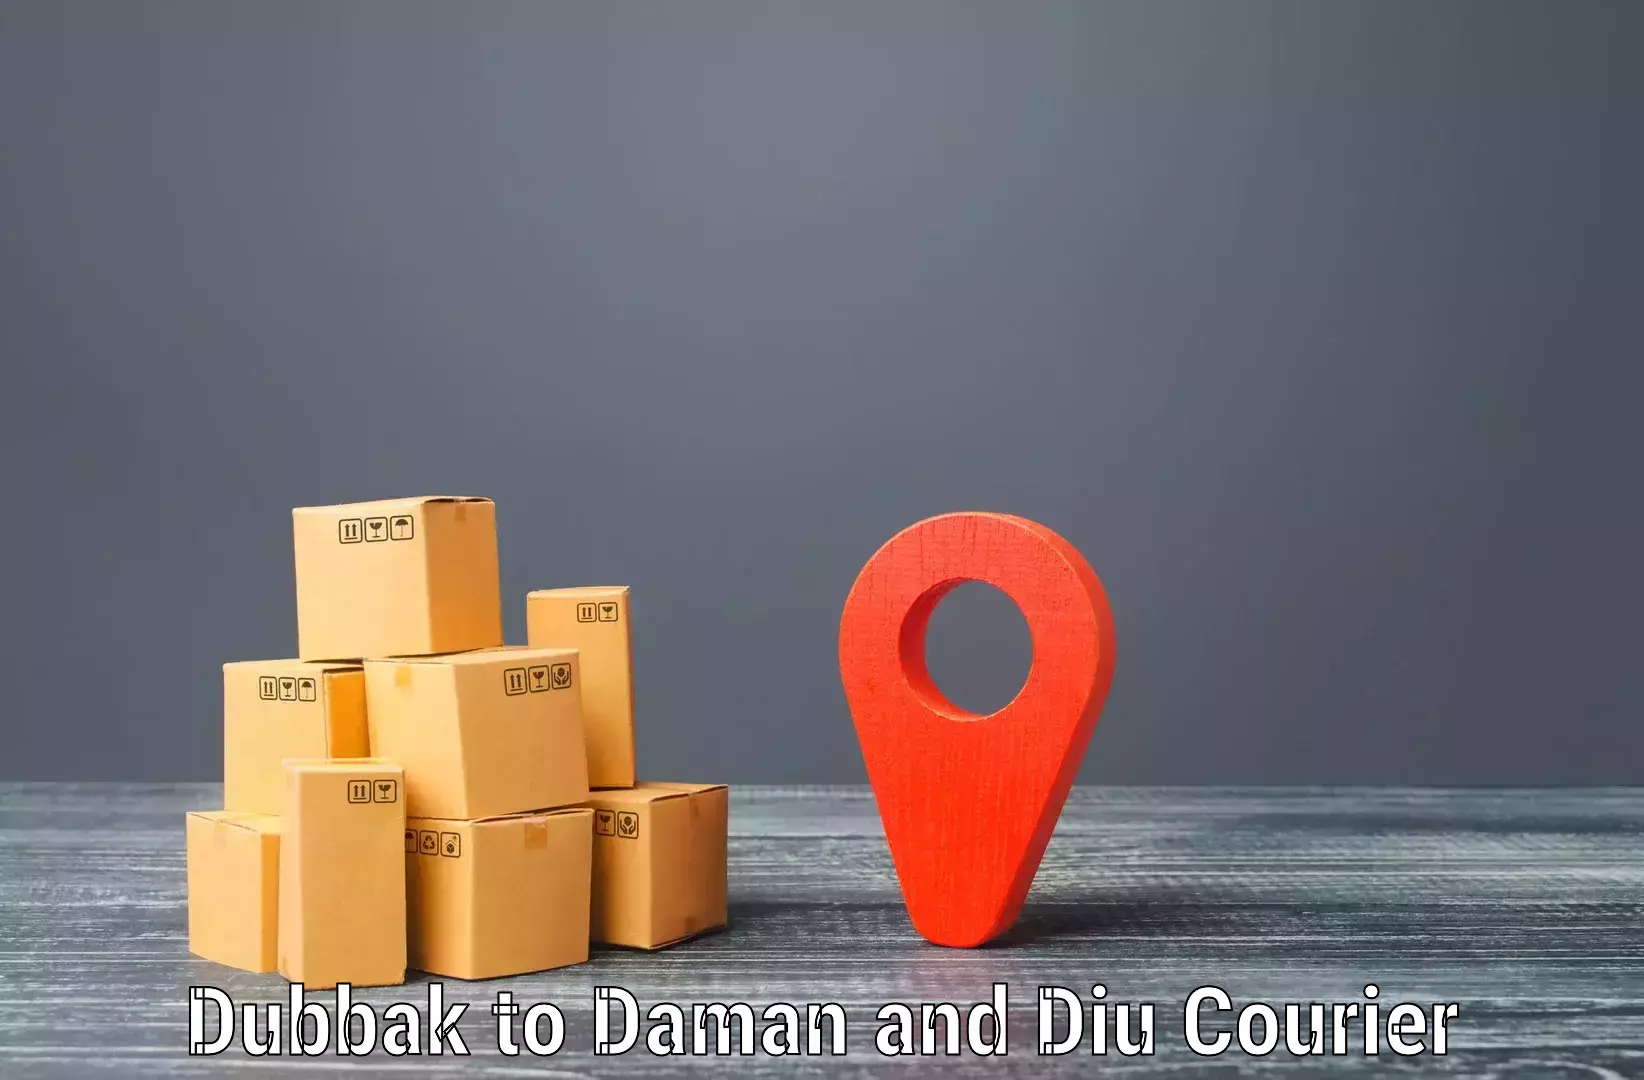 State-of-the-art courier technology Dubbak to Daman and Diu